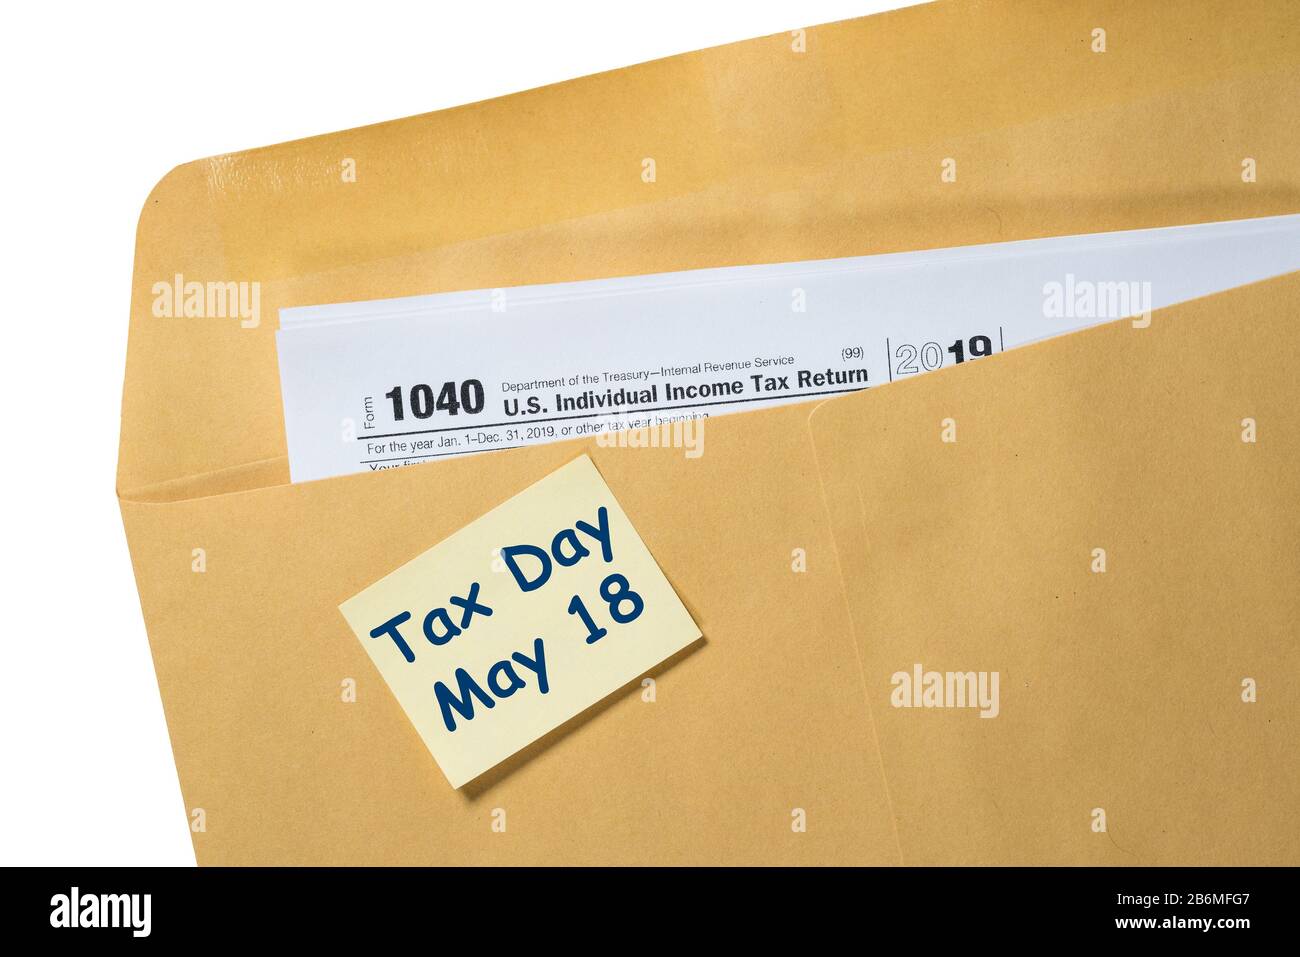 Printed Form 1040 for income tax return in brown envelope with reminder for May 18 tax day due to Covid-19 virus delay Stock Photo